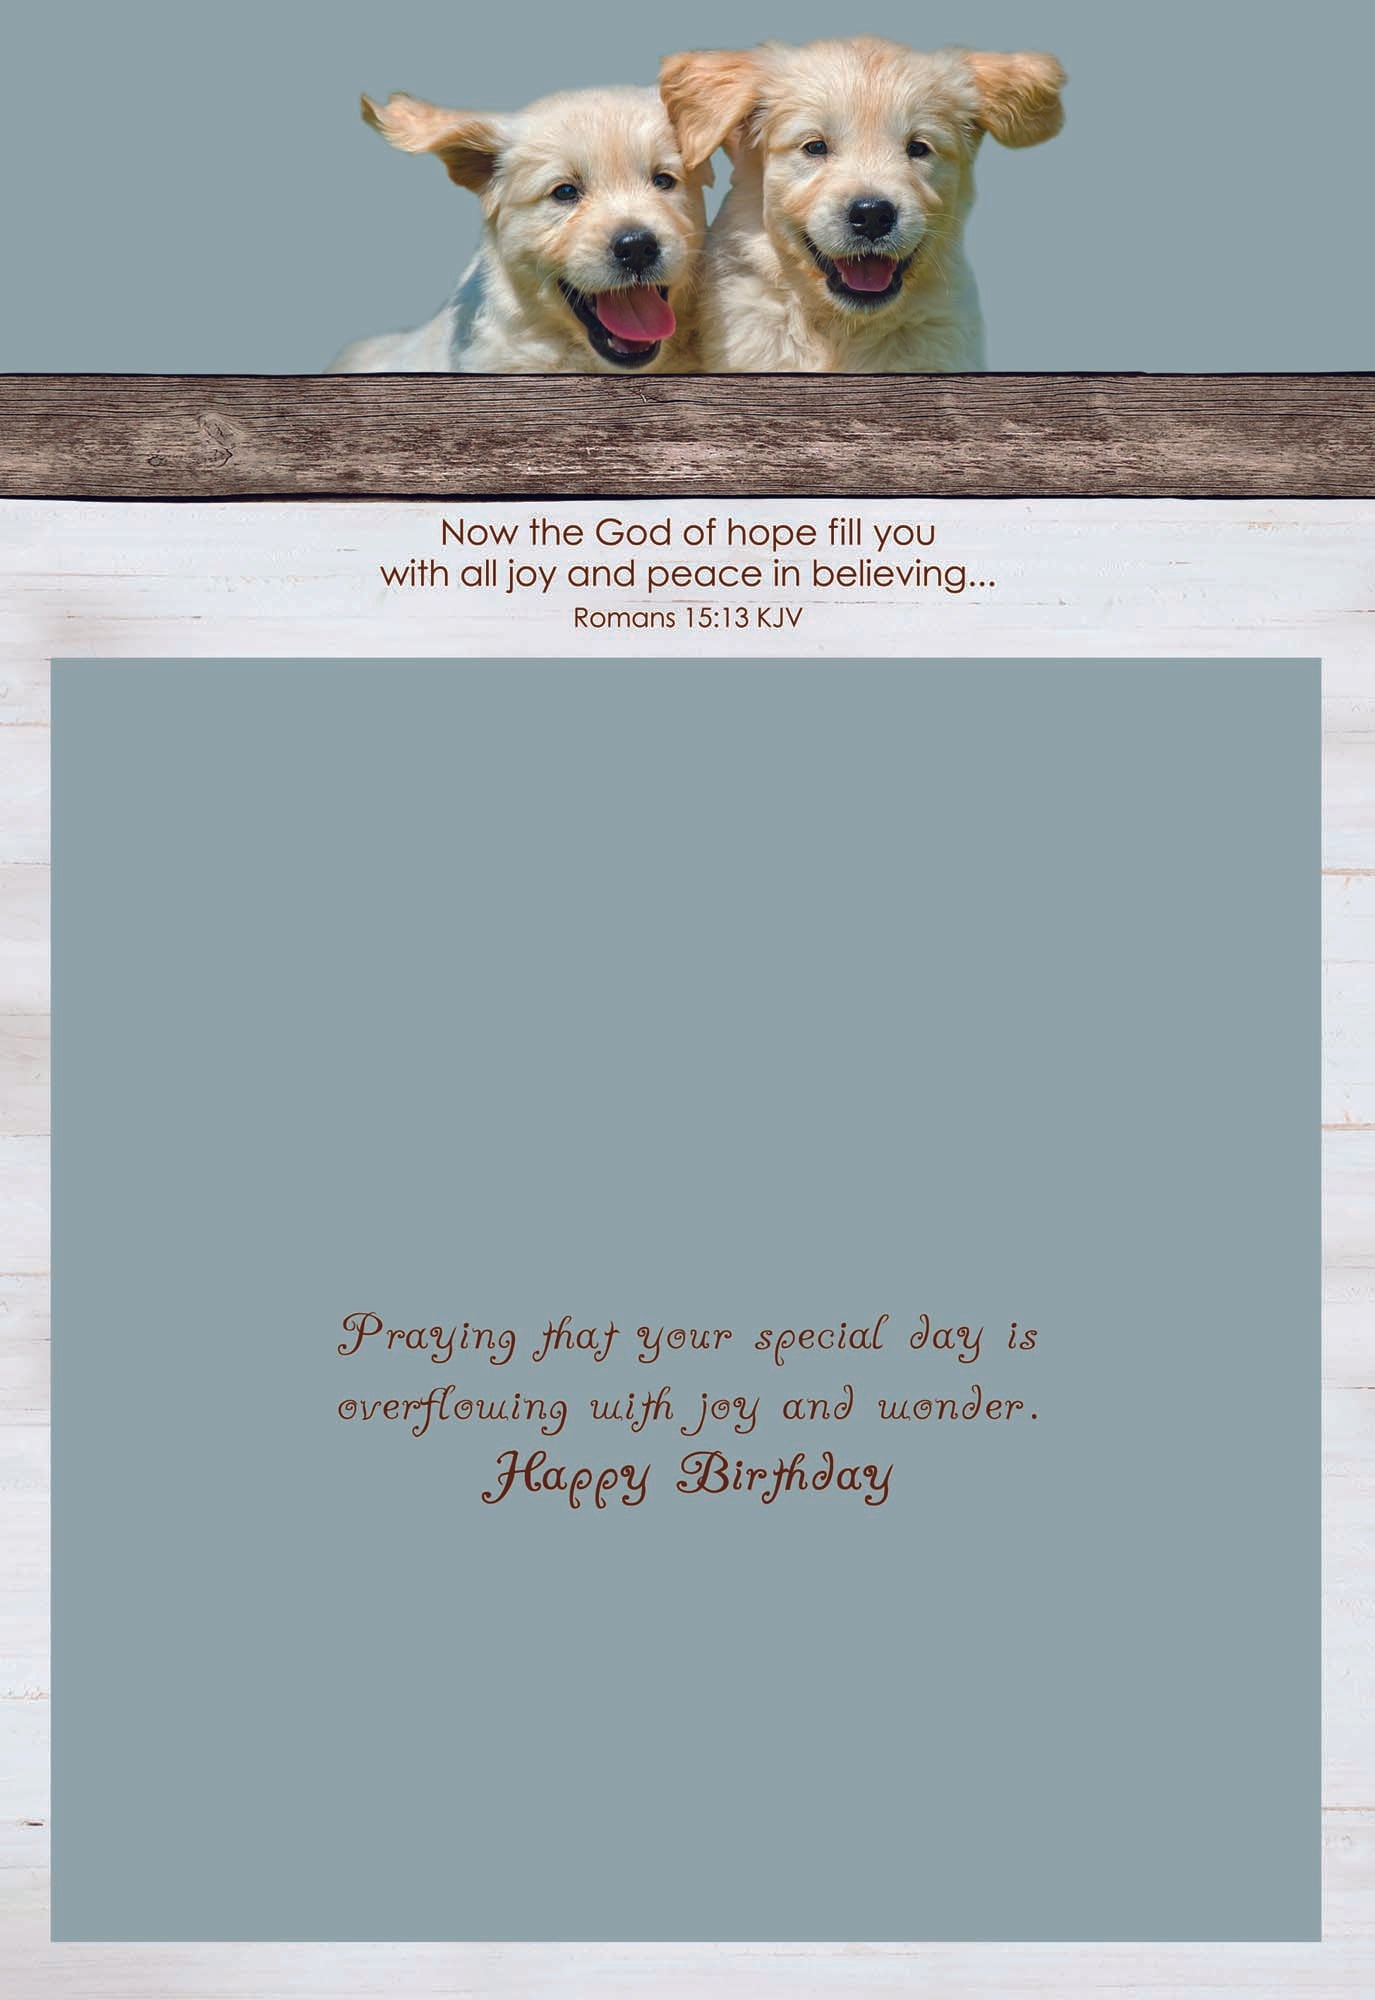 Birthday - Fur and Feathers - Assorted Birthday Cards, Box of 12